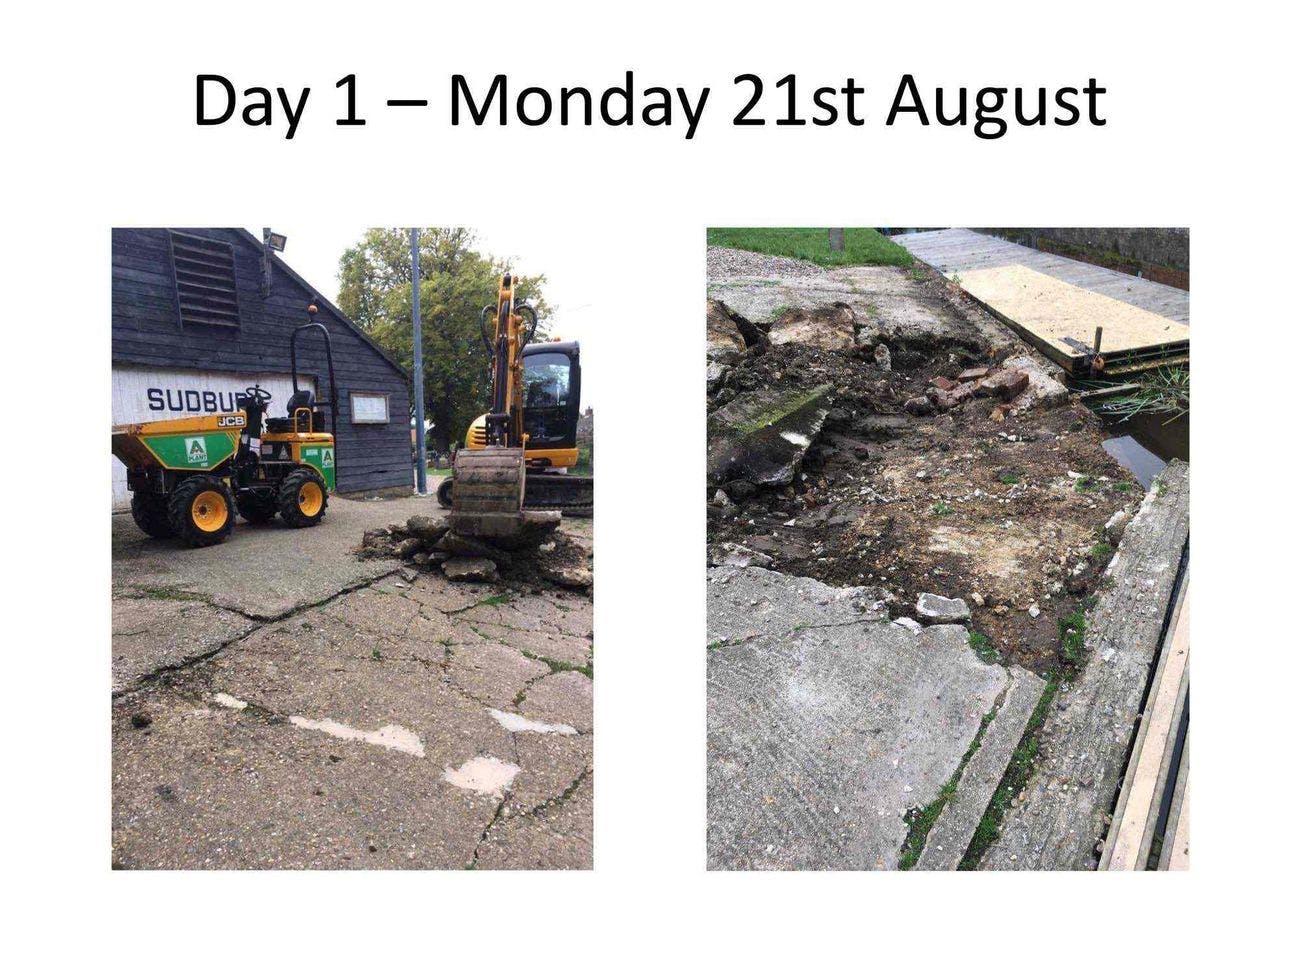 Day 1 – Monday 21st August